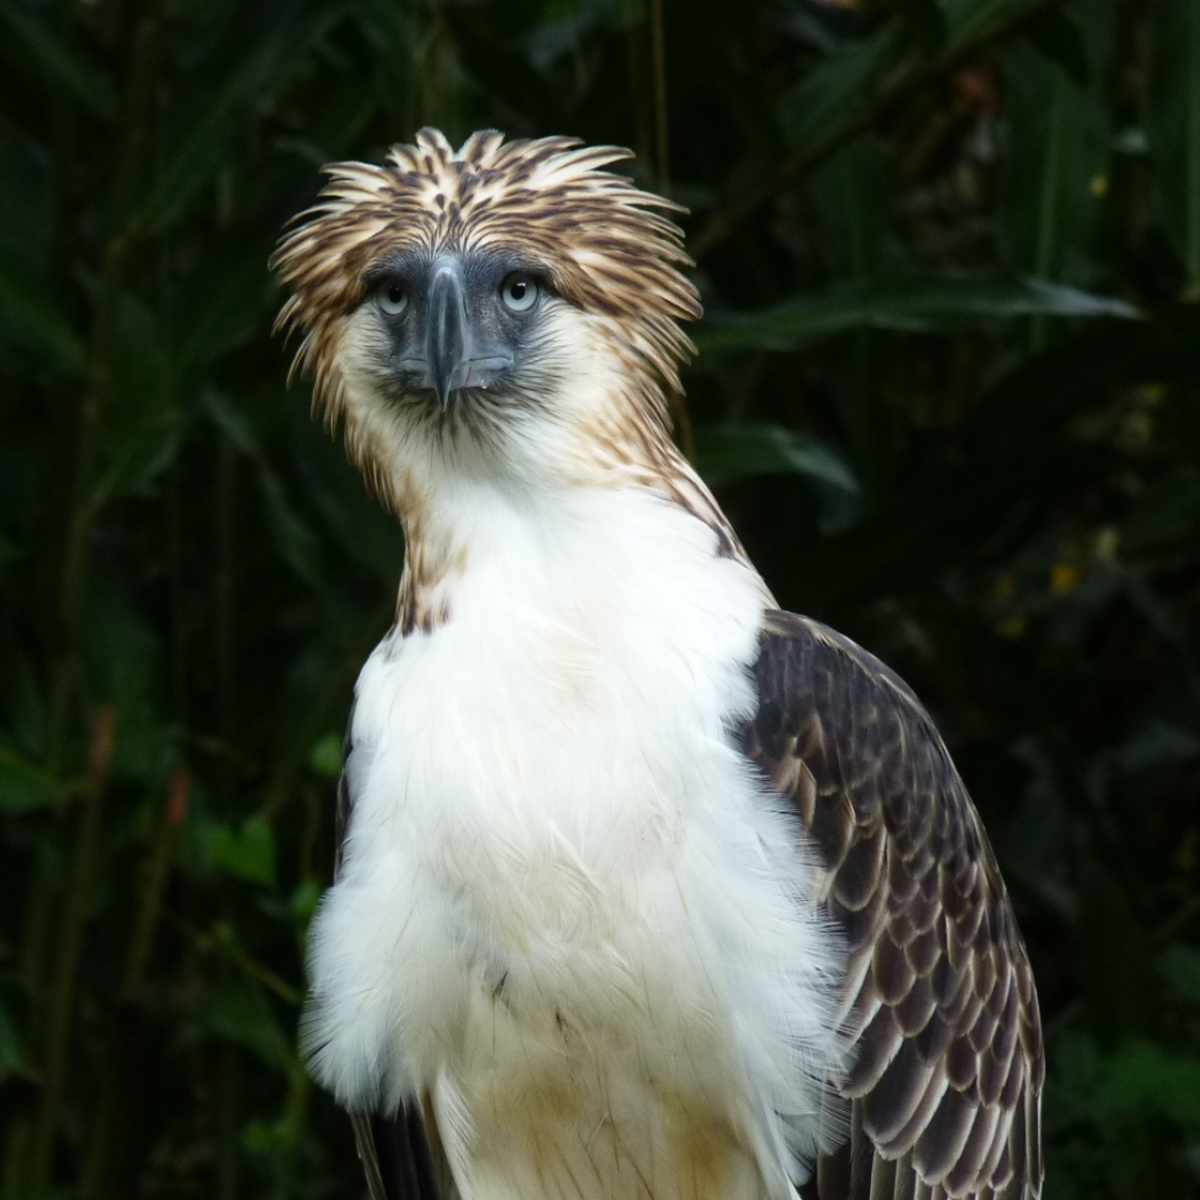 Read on to learn about some of the most endangered species in the Philippines, including the Philippine eagle, pictured above.